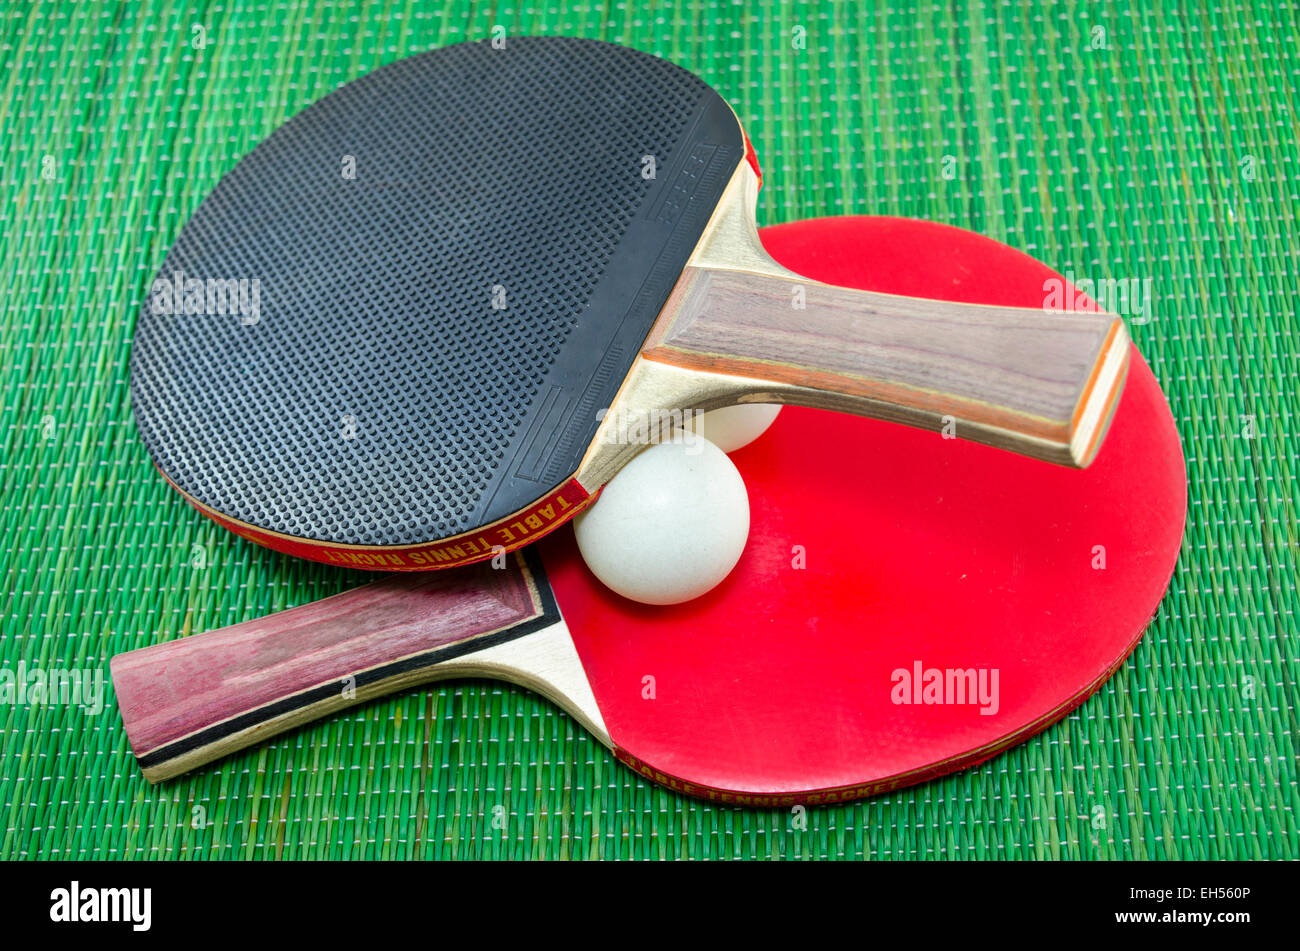 Two vintage table tennis rackets and two ping pong balls on a green background Stock Photo